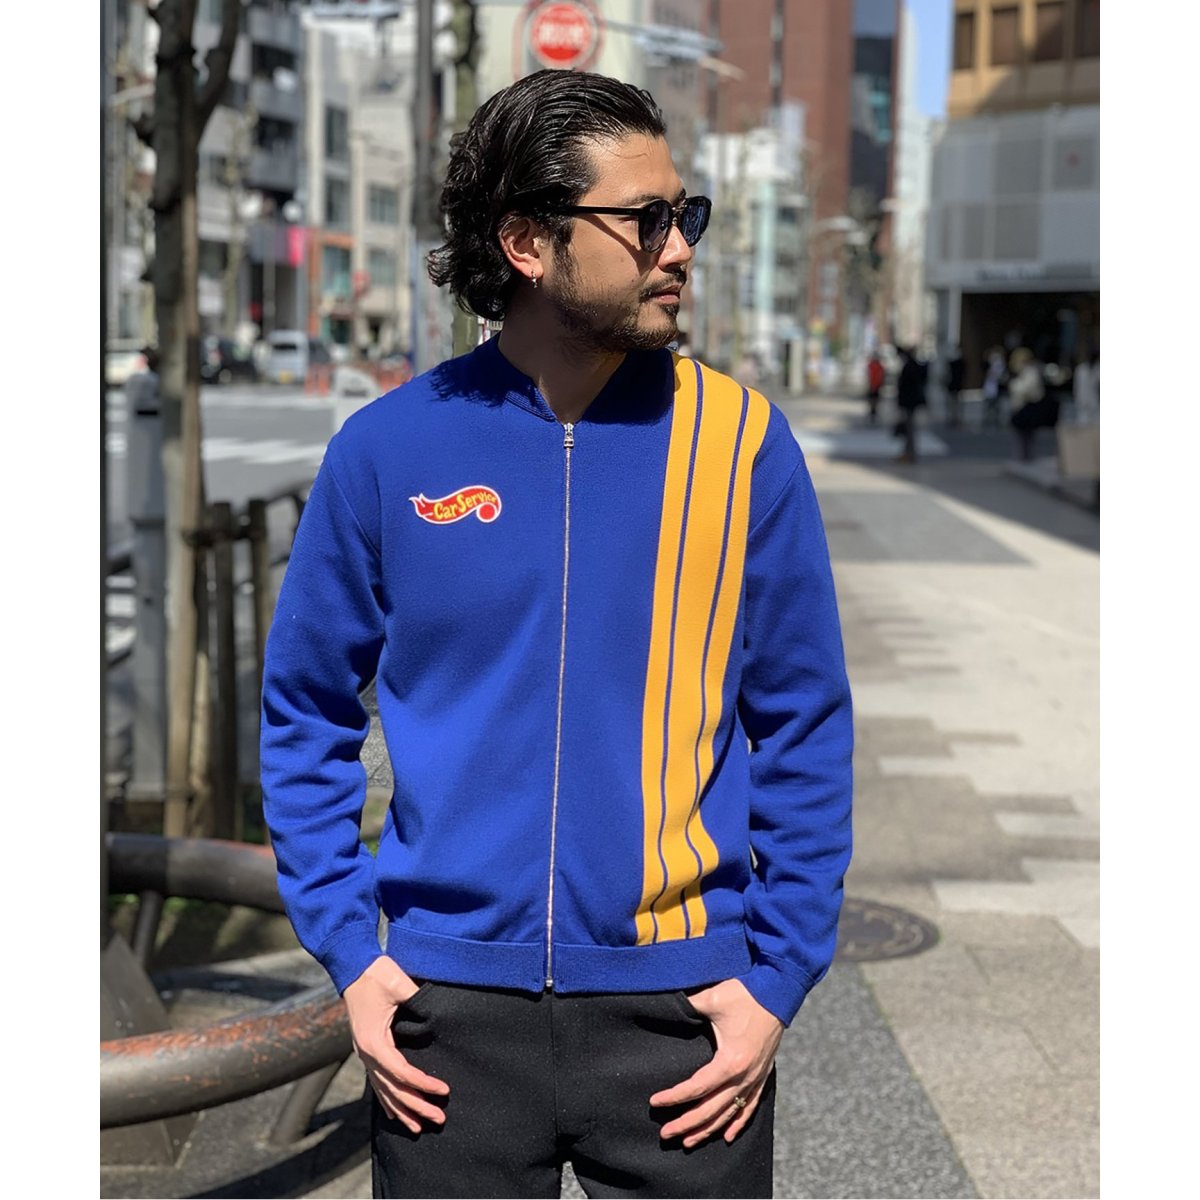 carservice racing knit jacket サイズ2身幅約60